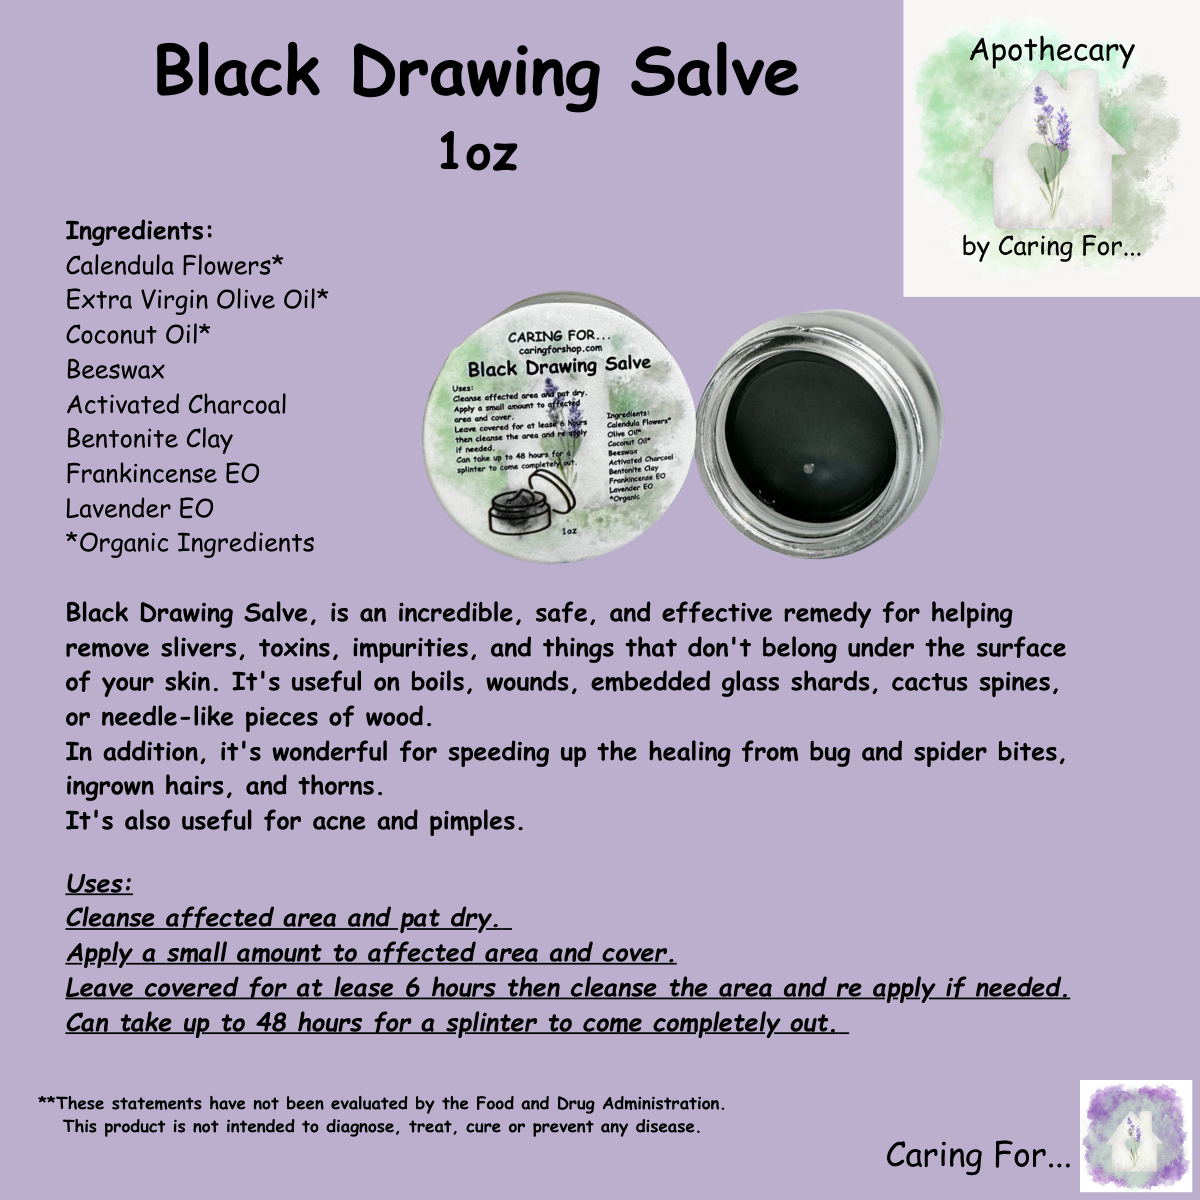 Black Drawing Salve | Salve | Apothecary by Caring For...